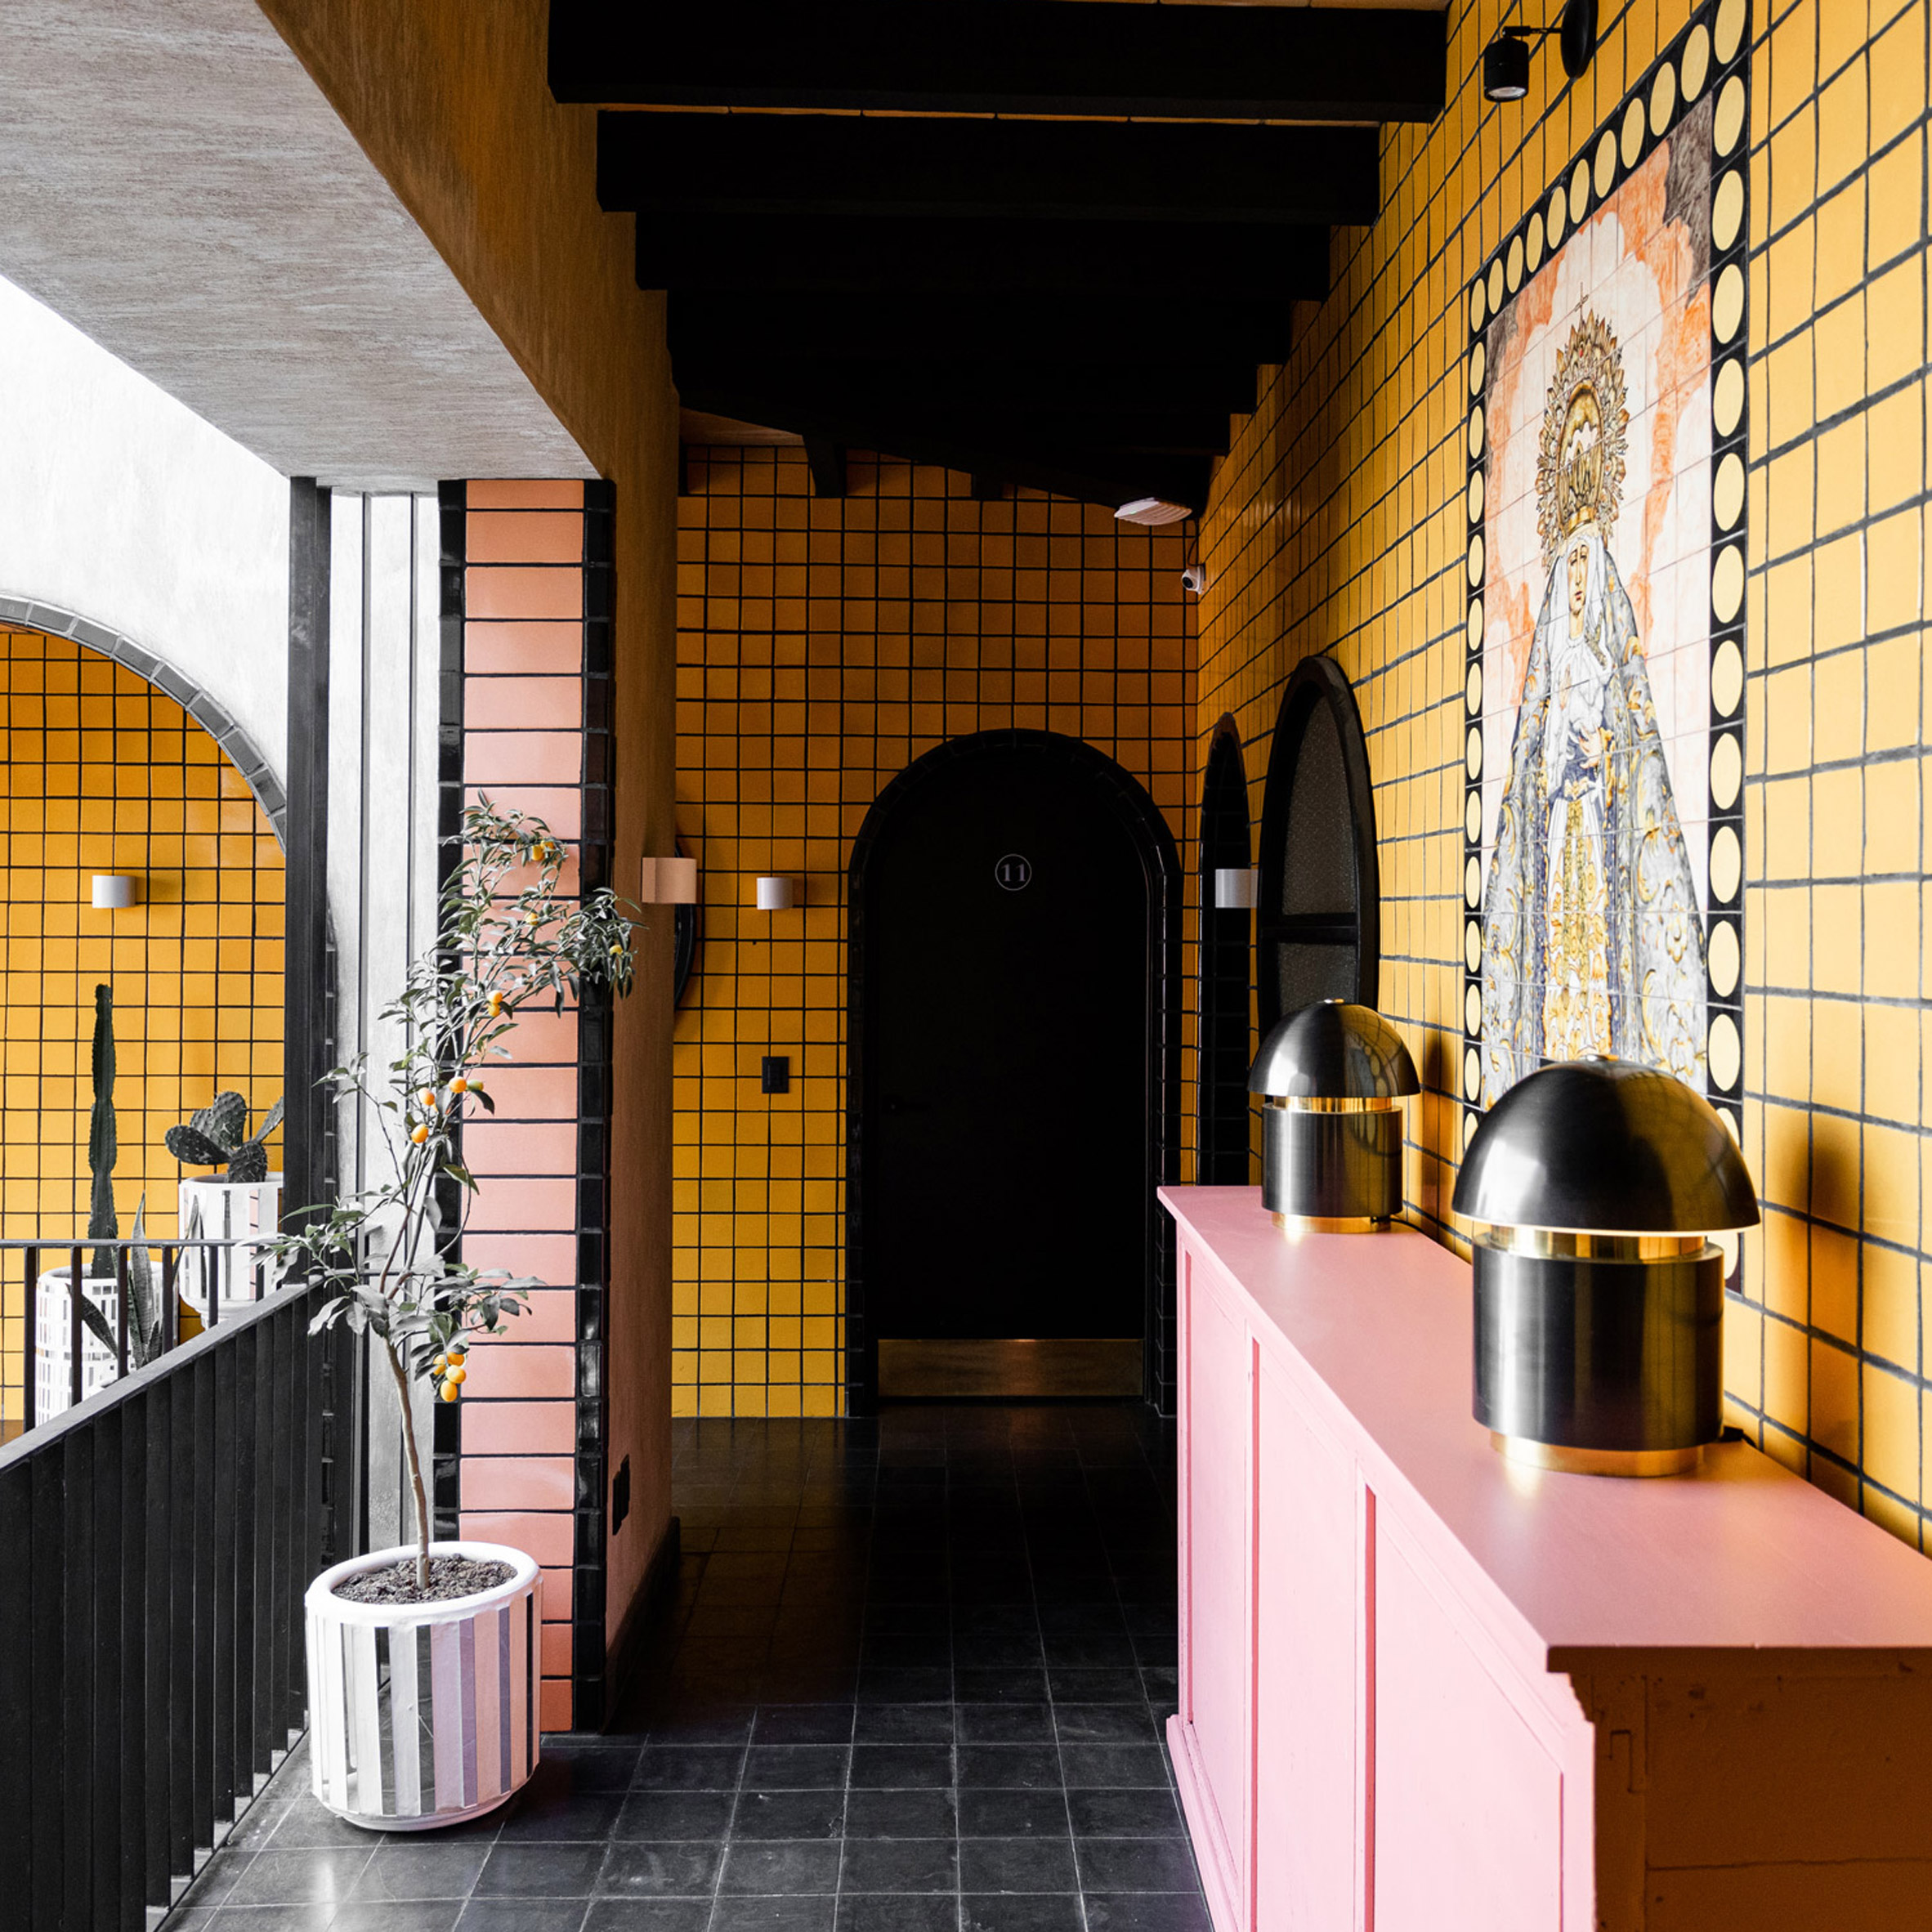 Colourful tiles and Mexican craft feature in Casa Hoyos hotel by